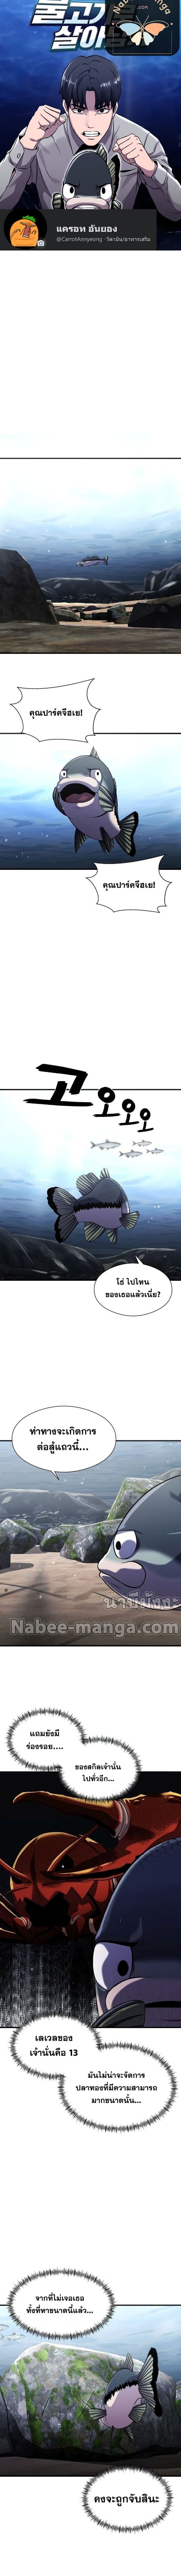 Surviving As a Fish 15 (1)